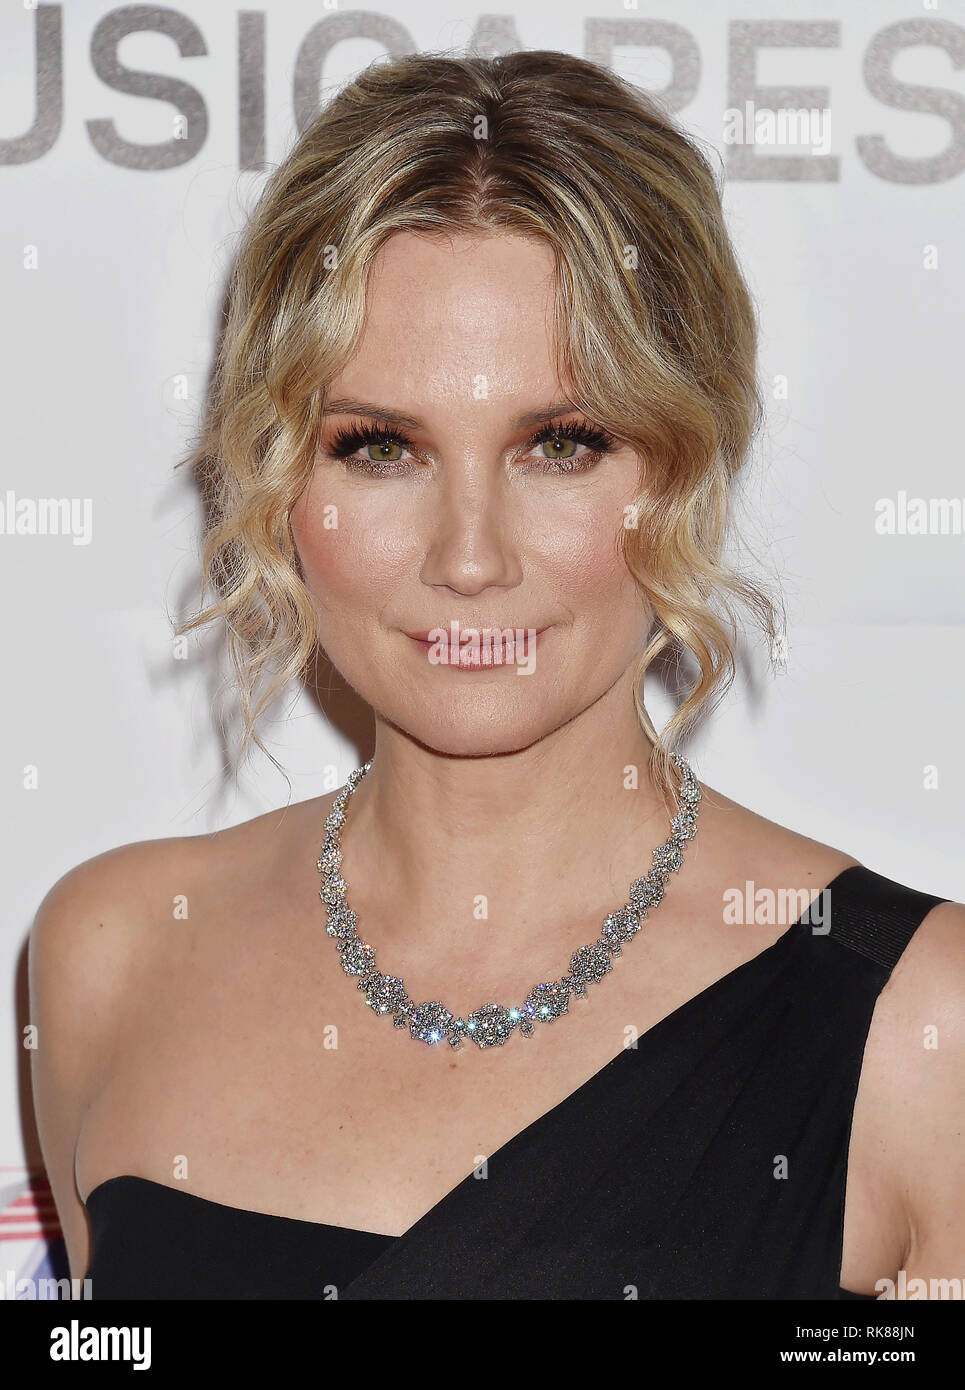 LOS ANGELES, CA - FEBRUARY 08: Jennifer Nettles attends MusiCares Person of the Year honoring Dolly Parton at Los Angeles Convention Center on Februar Stock Photo